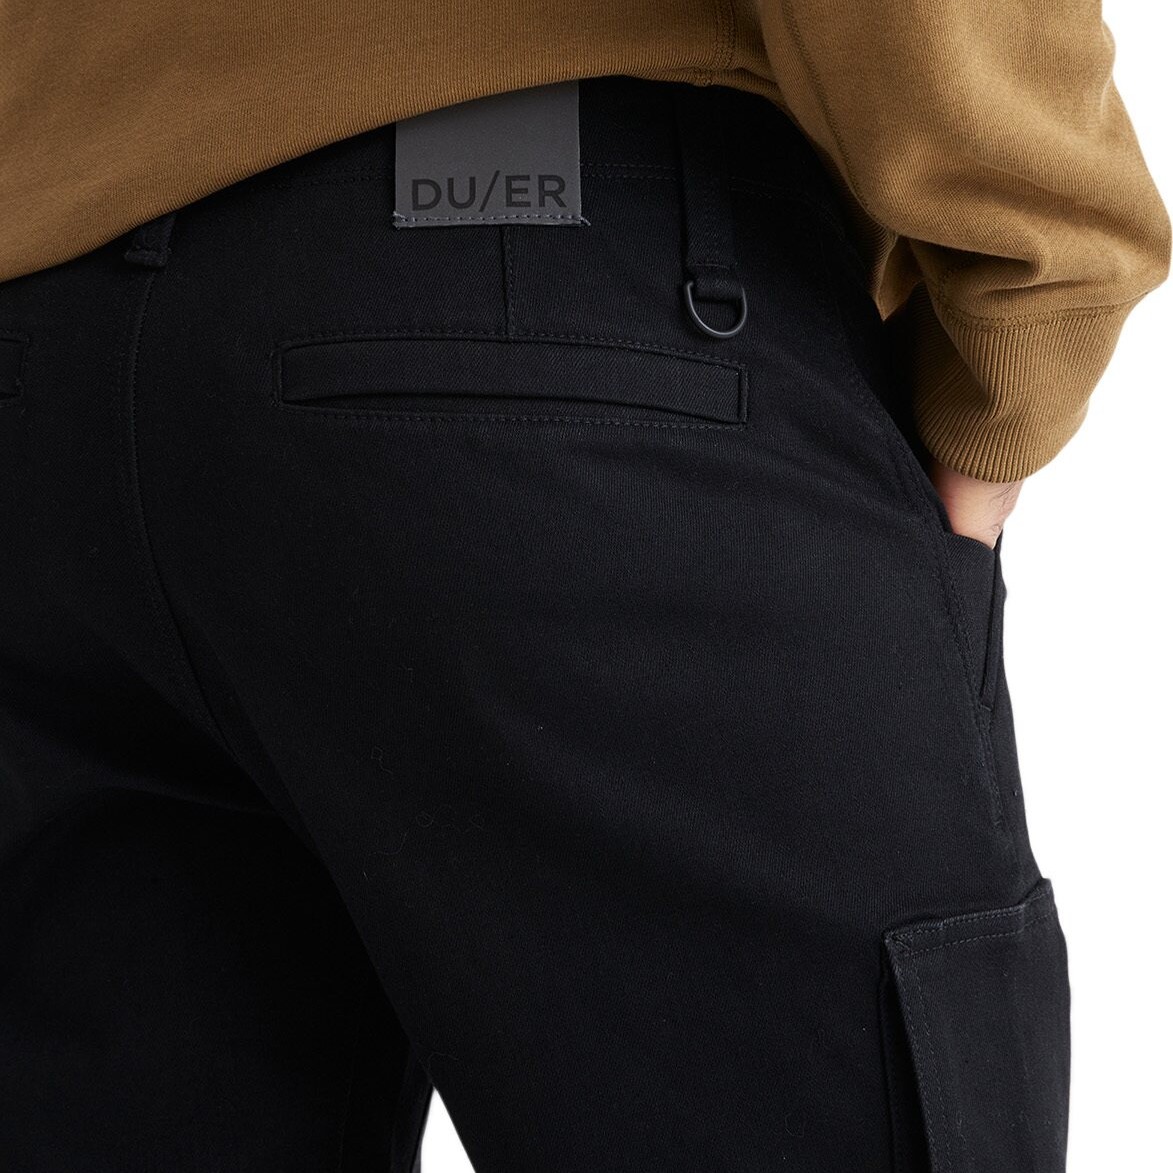 Duer All-Weather Adventure Men's Pant